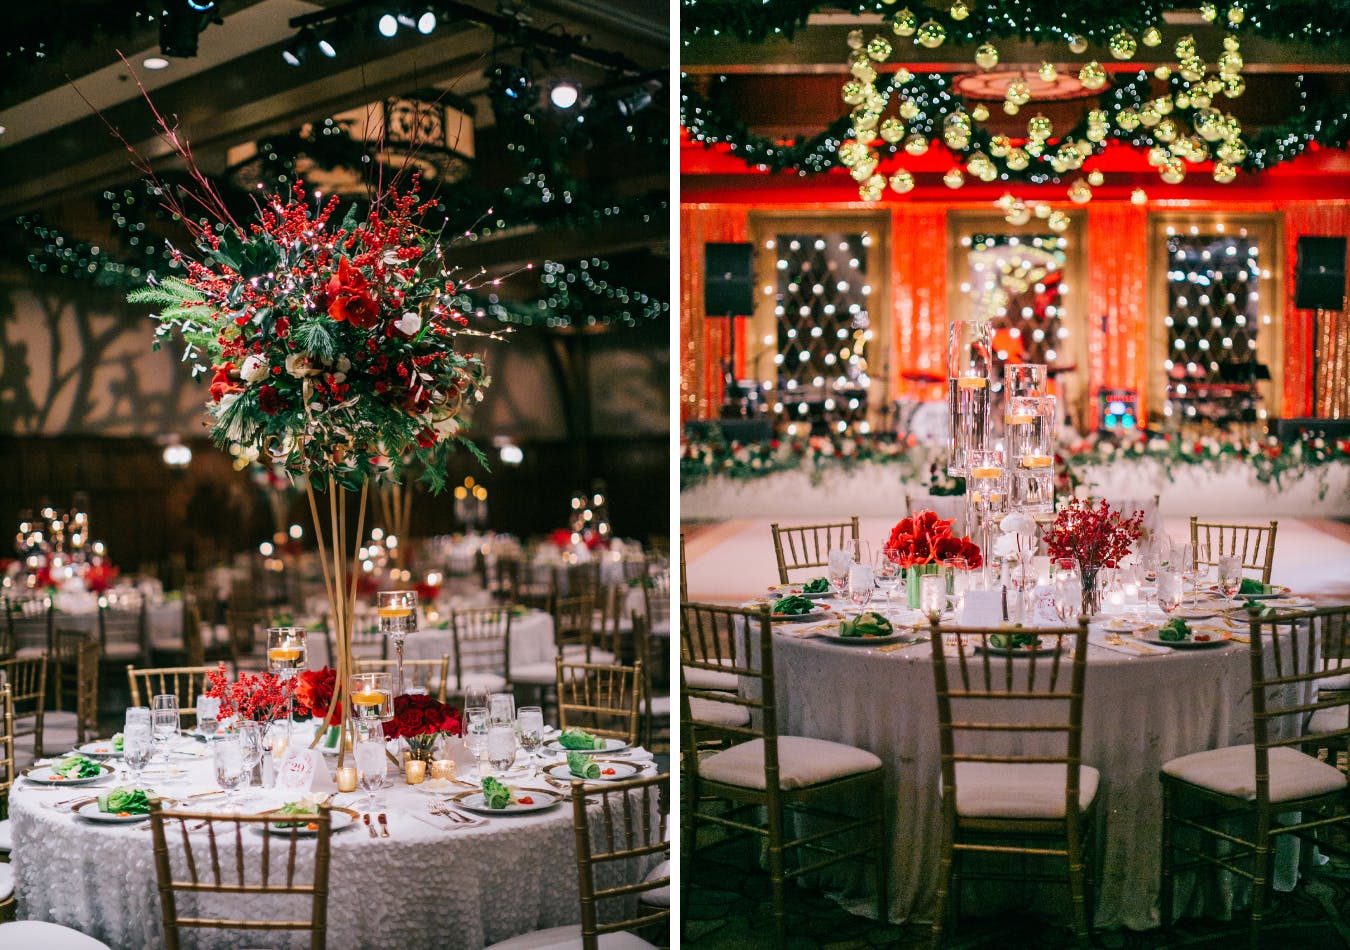 Winter wedding with red and green Christmas-style décor | PartySlate